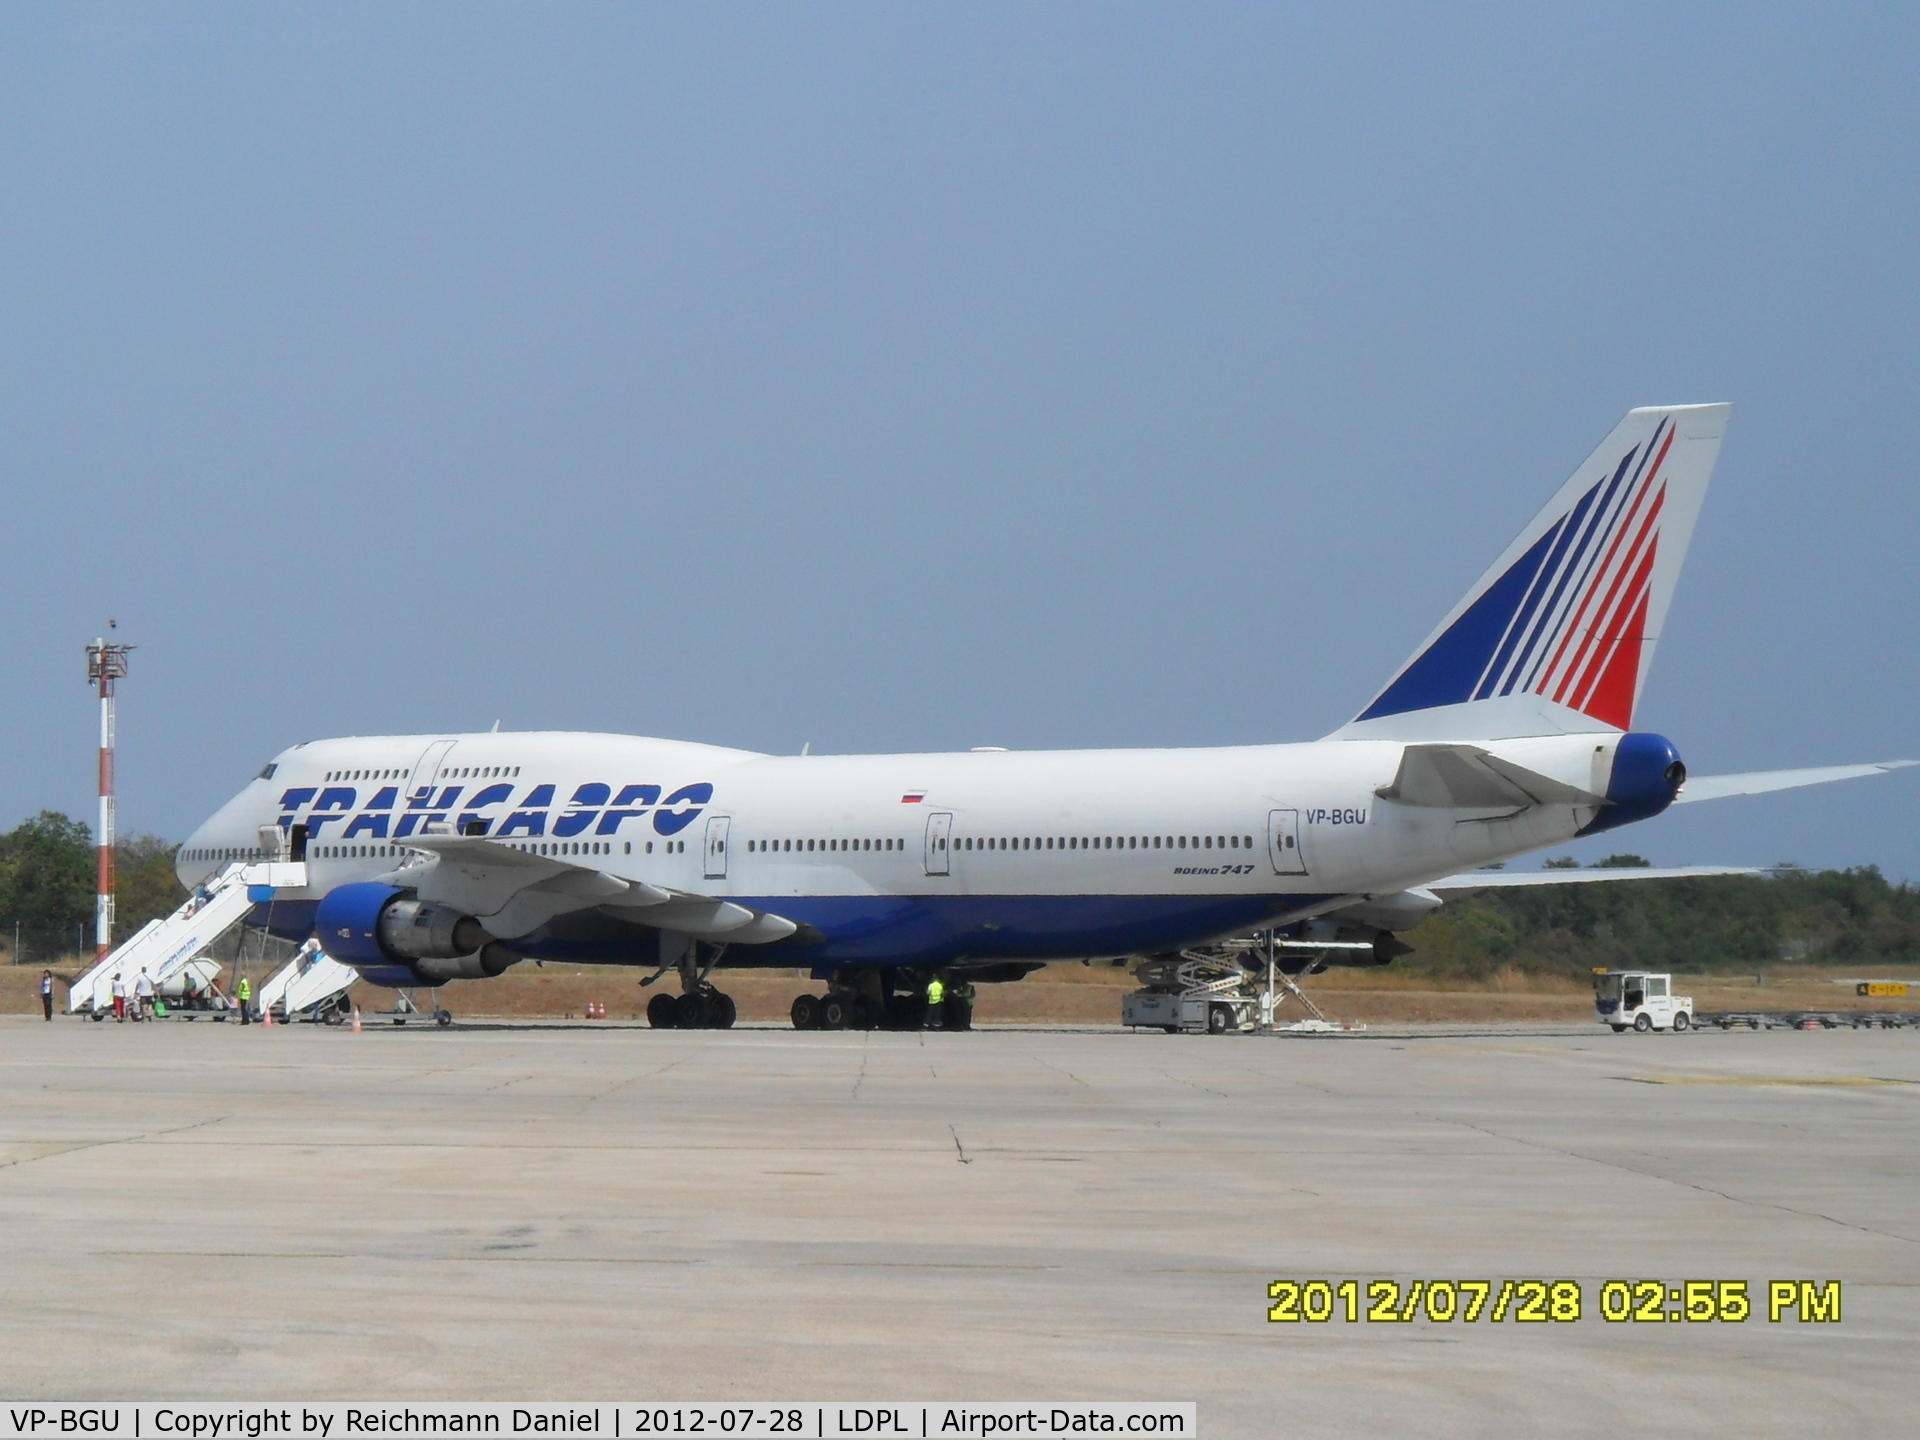 VP-BGU, 1986 Boeing 747-346 C/N 23482, Transaero just arrived from Moscow, i love this old beauty :)